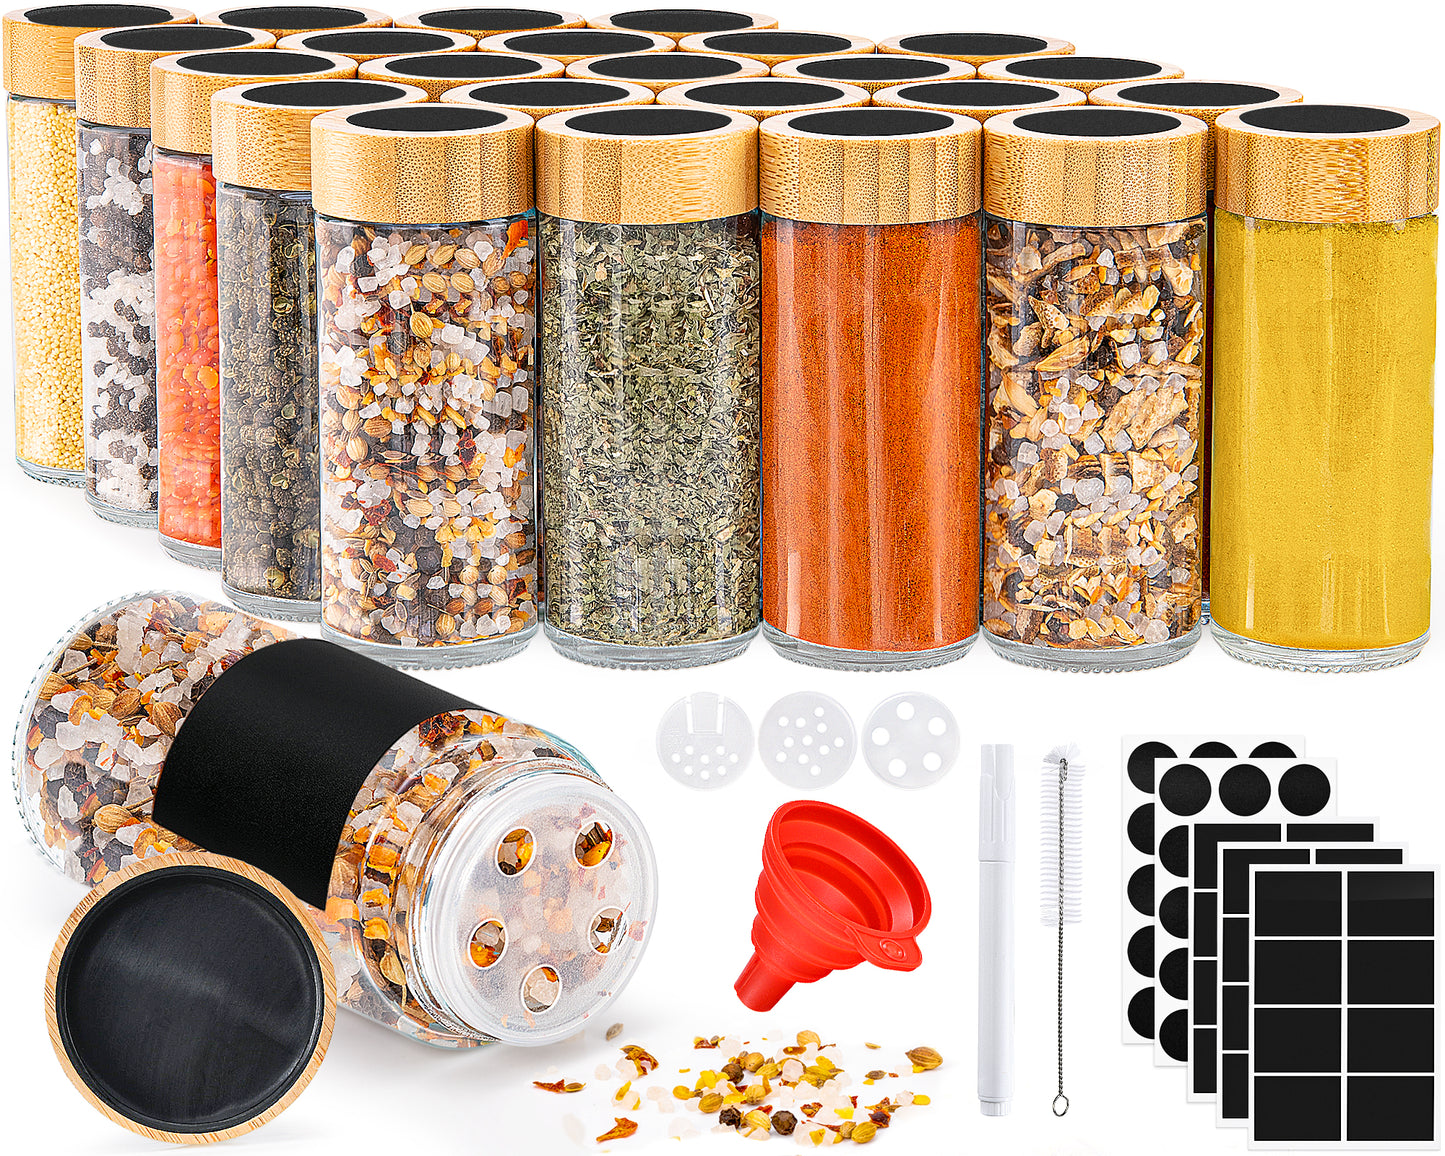 GoMaihe spice jars 25 pieces, spice jars 120 ml, spice containers, spice jars with sprinkler insert, funnel, spice labels